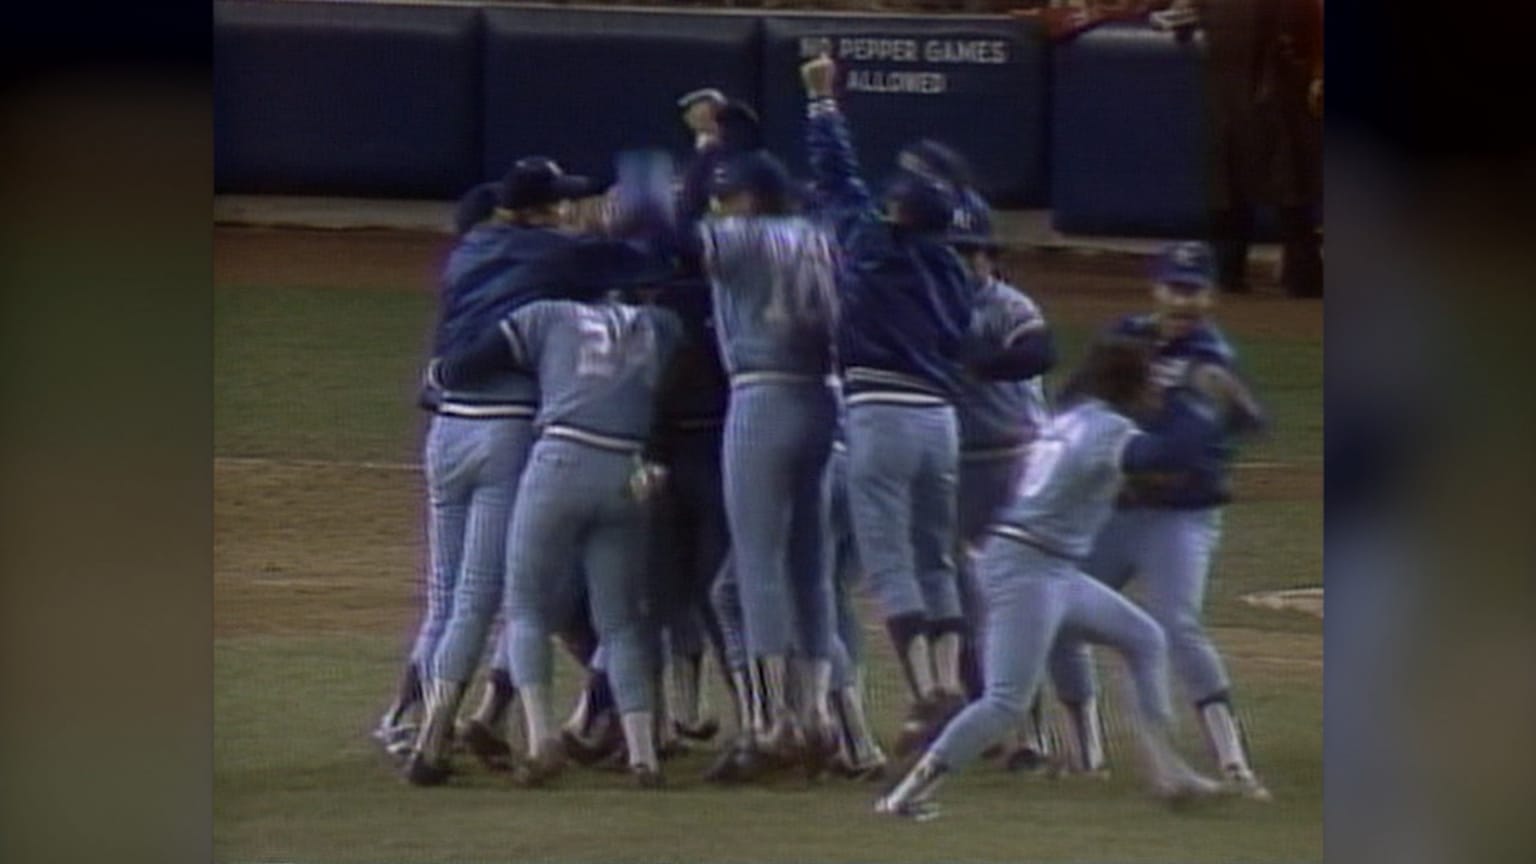 October 10, 1980: Royals advance to first World Series after sweeping  Yankees in ALCS – Society for American Baseball Research